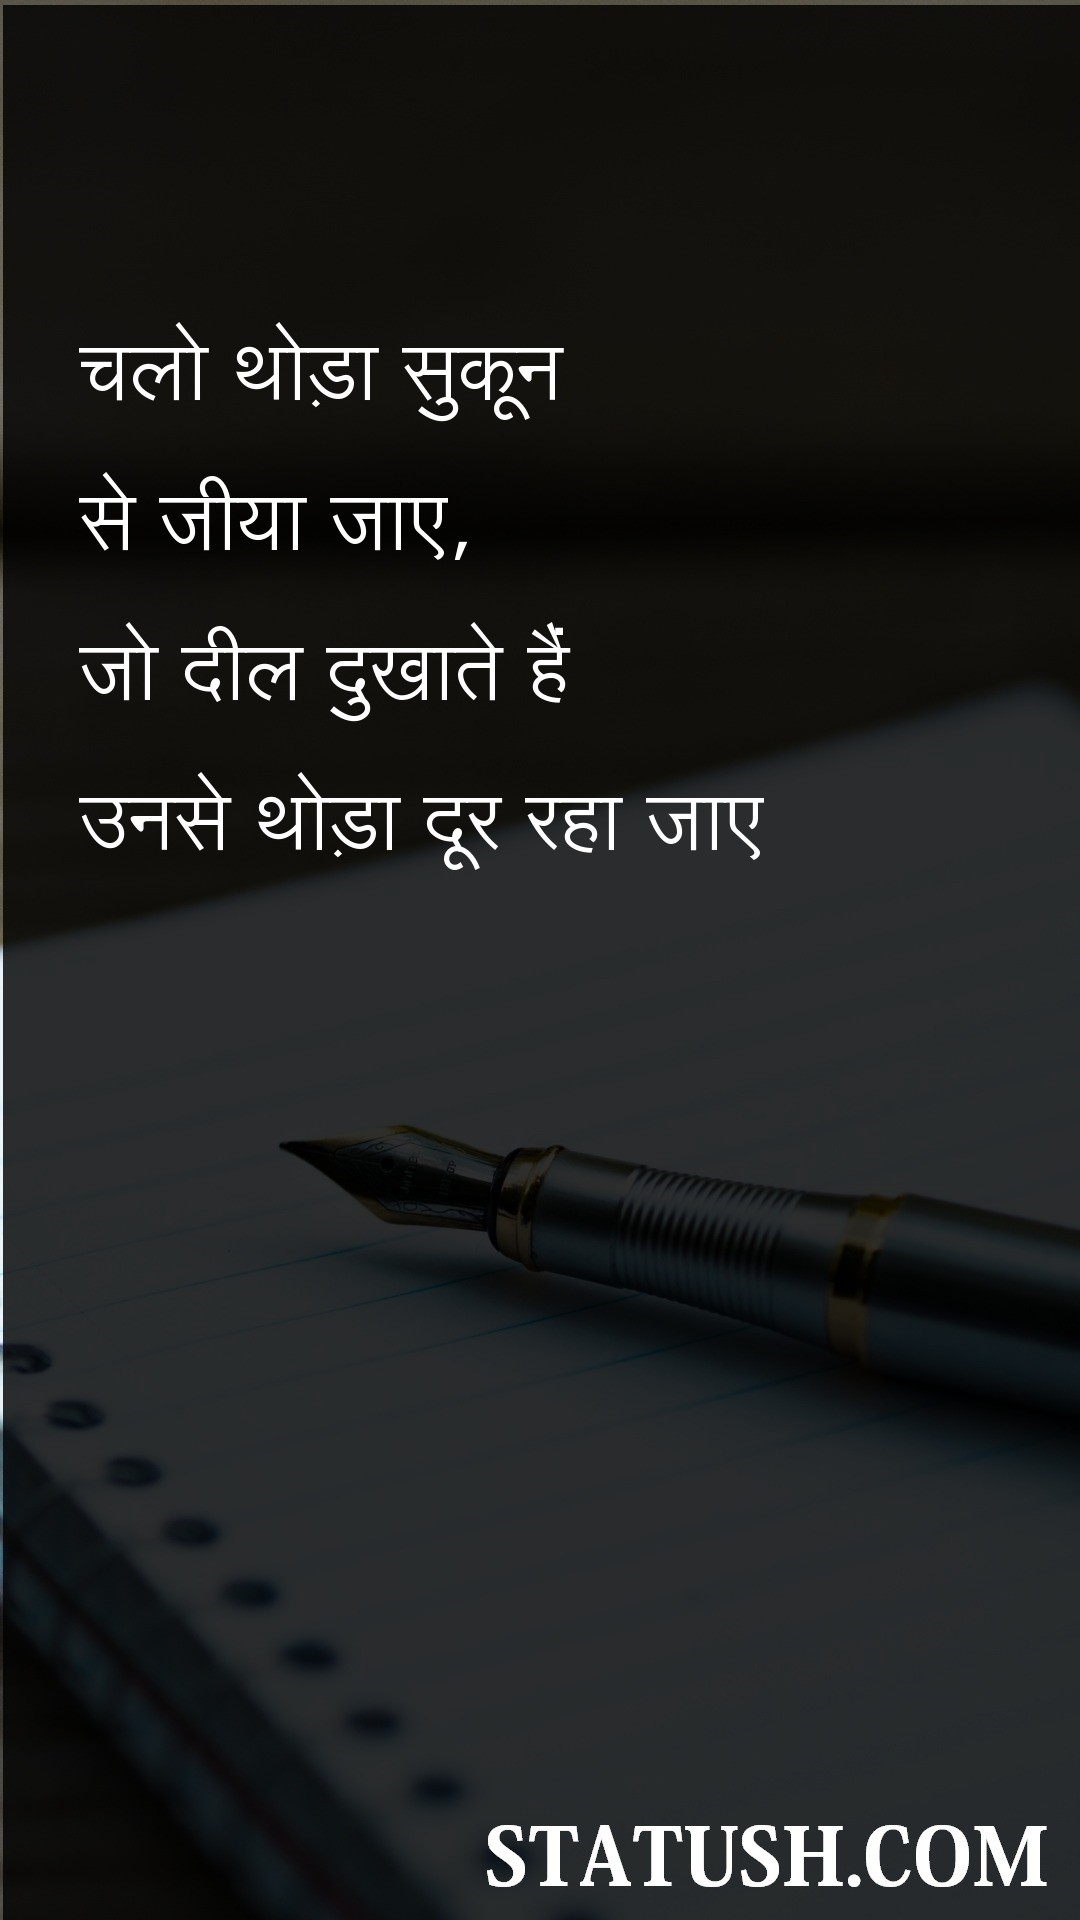 Lets live a little relaxed Hindi Quotes at statush.com